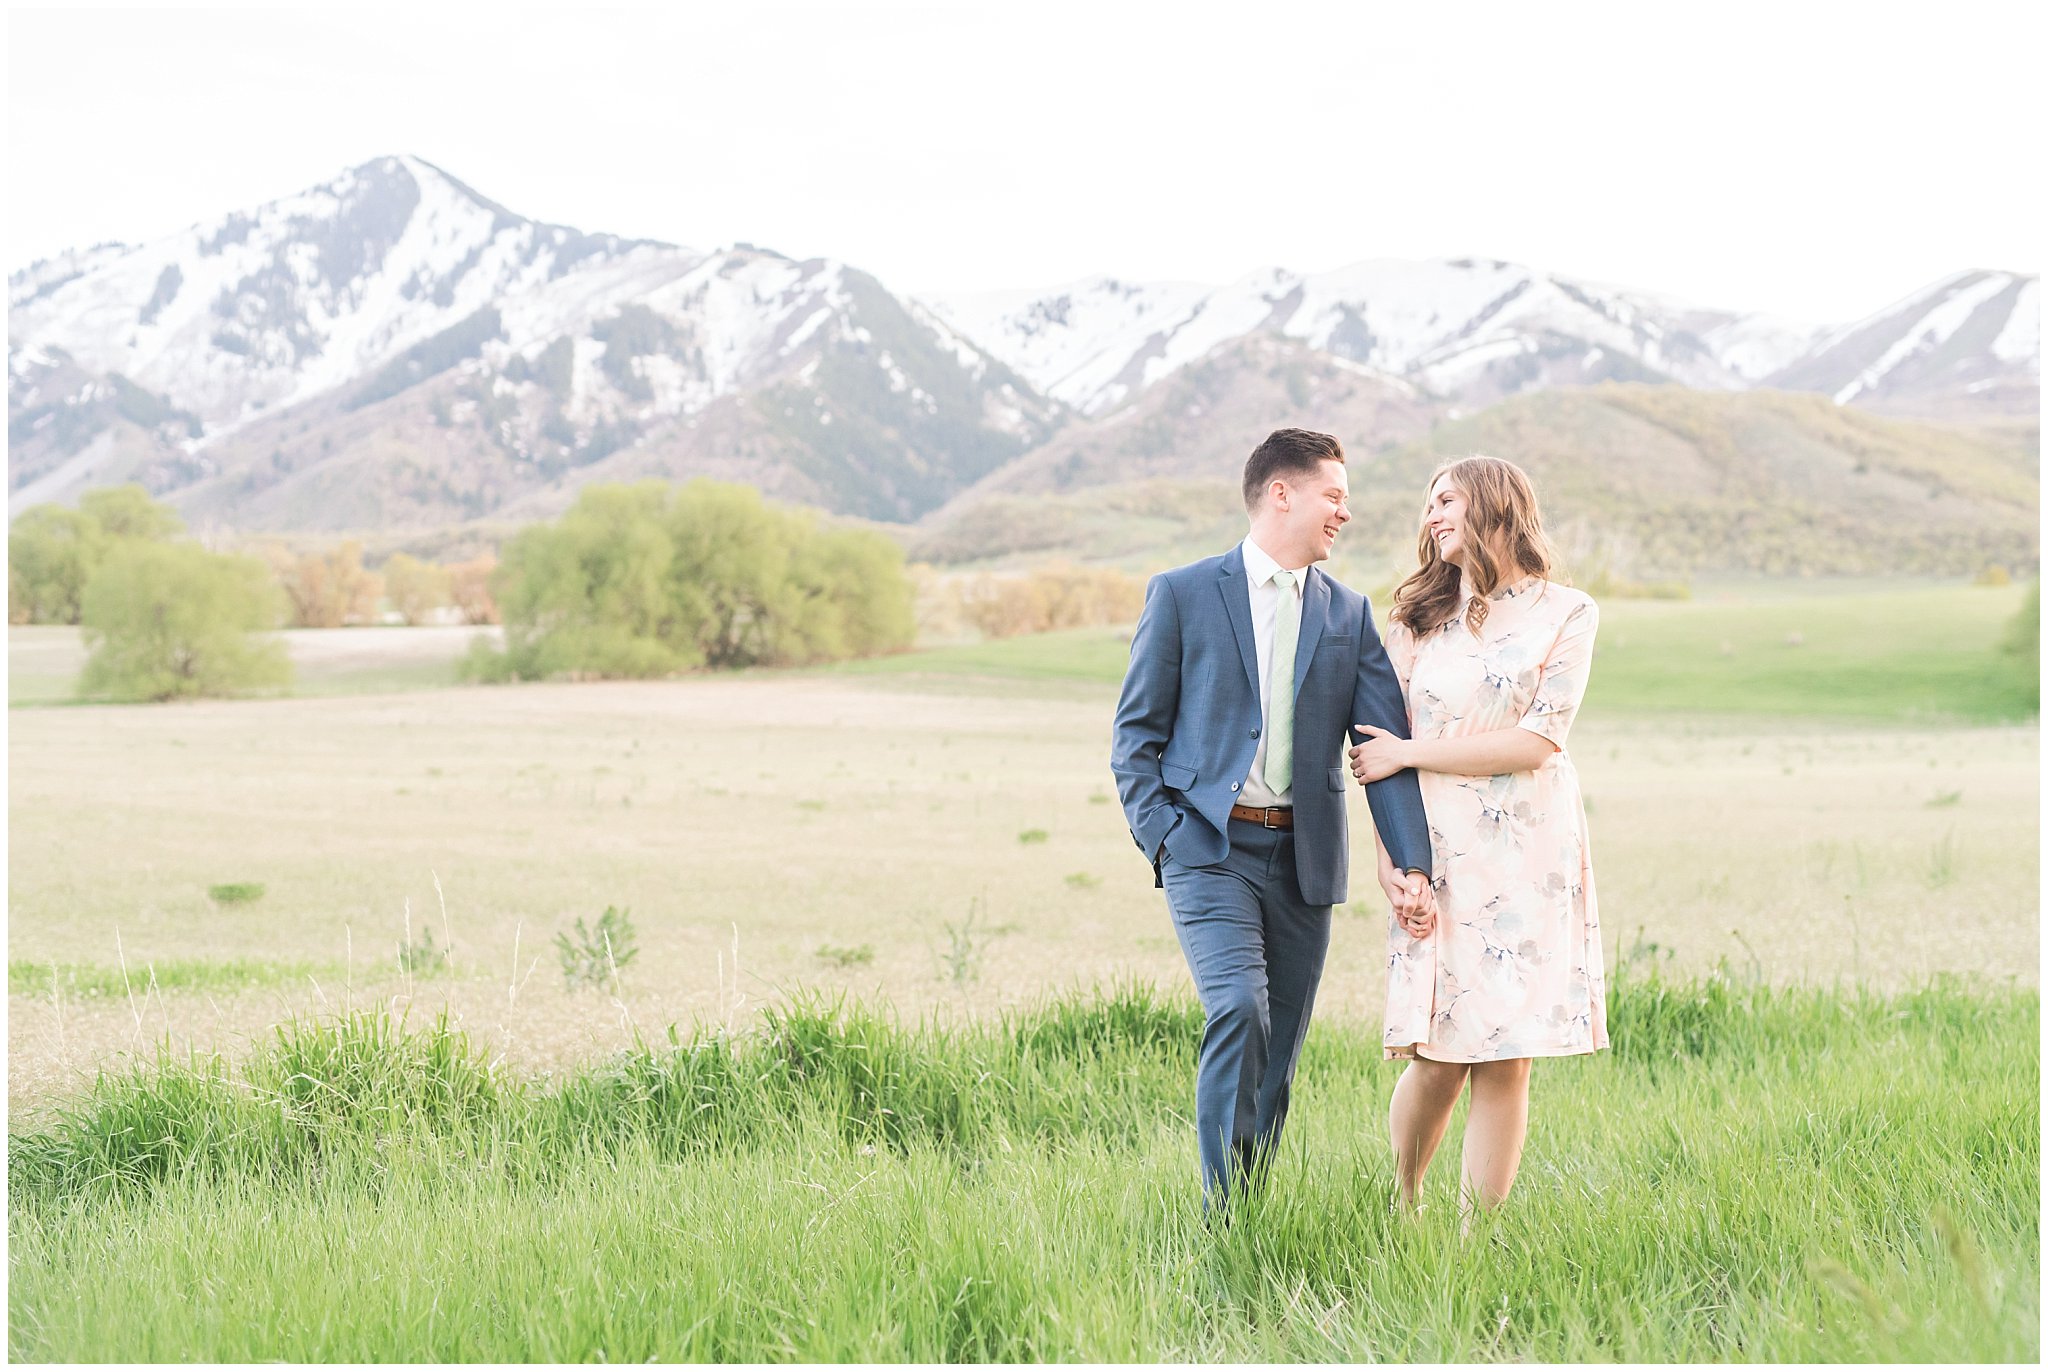 Couple during their mountain engagements | Top Utah Wedding and Couples Photos 2019 | Jessie and Dallin Photography